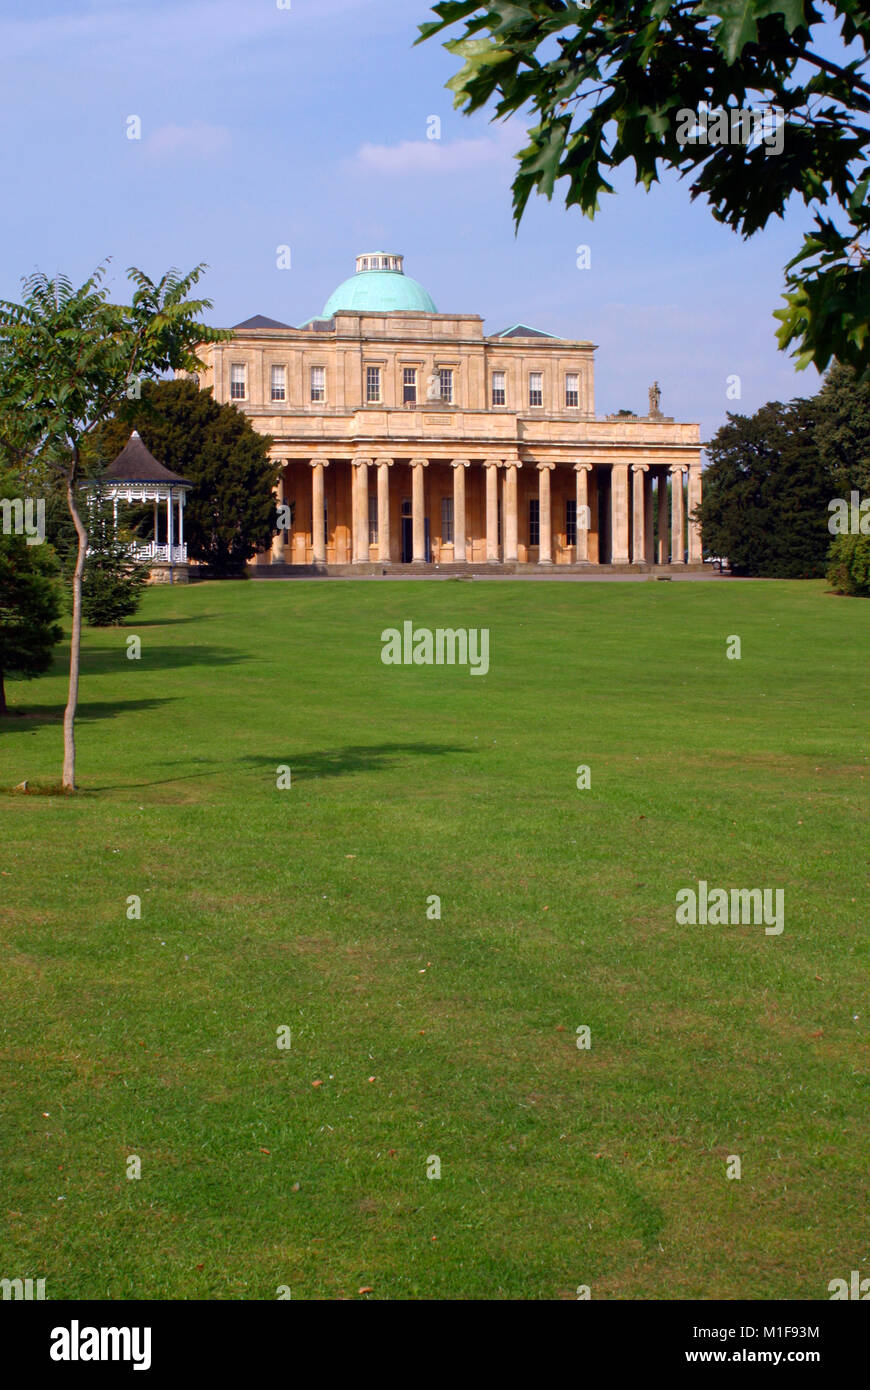 The famous Pump Rooms old spa mineral water buildings in Pittville Park, Cheltenham, Gloucestershire,UK Stock Photo